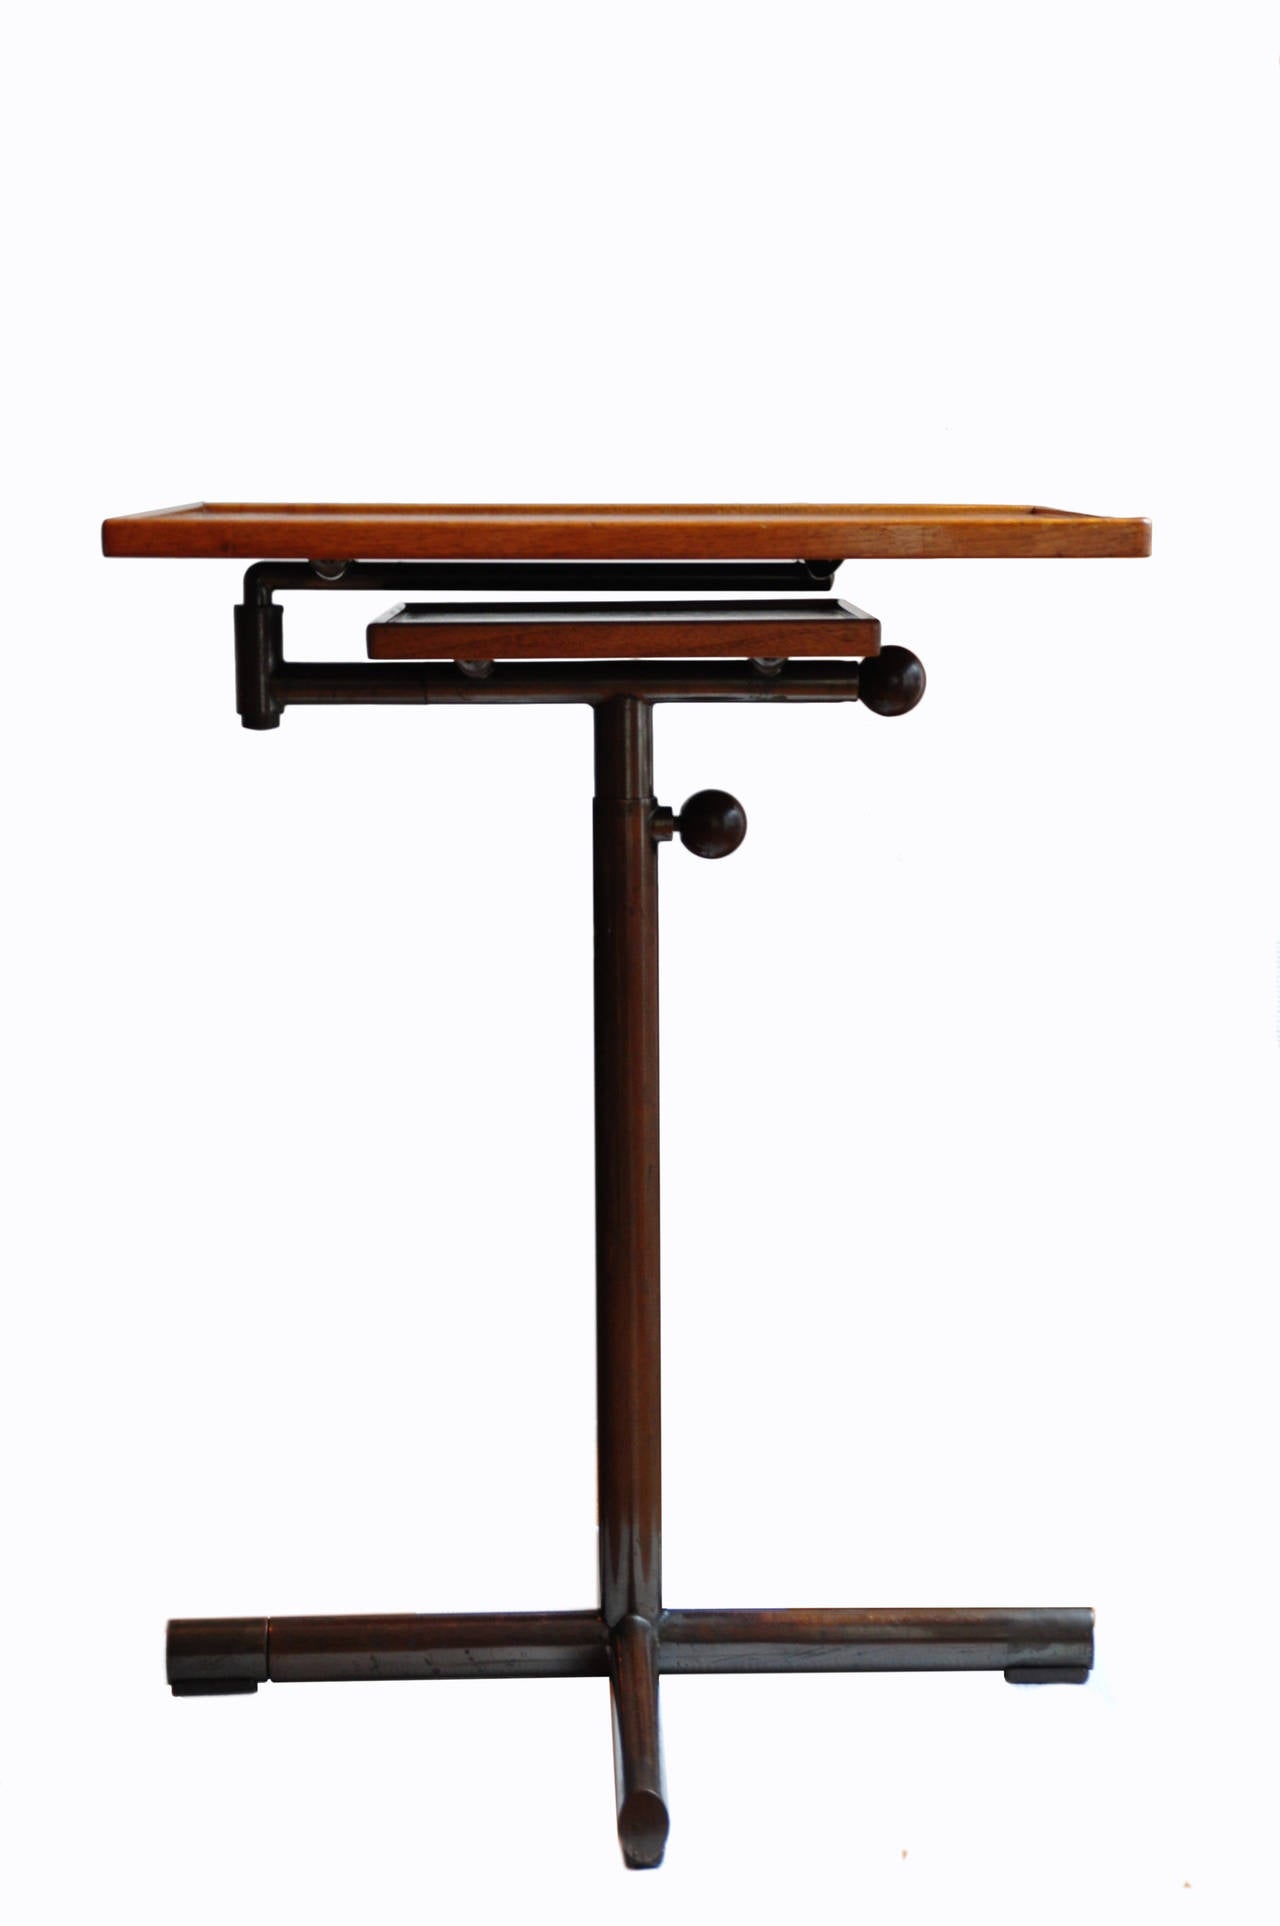 Functional and immensely practical pair of tables by Embru, Switzerland, 1940s edition. The tables look great in any modern interior and works equally as bedside or end tables. The copper plated steel structure is in excellent condition, see detail